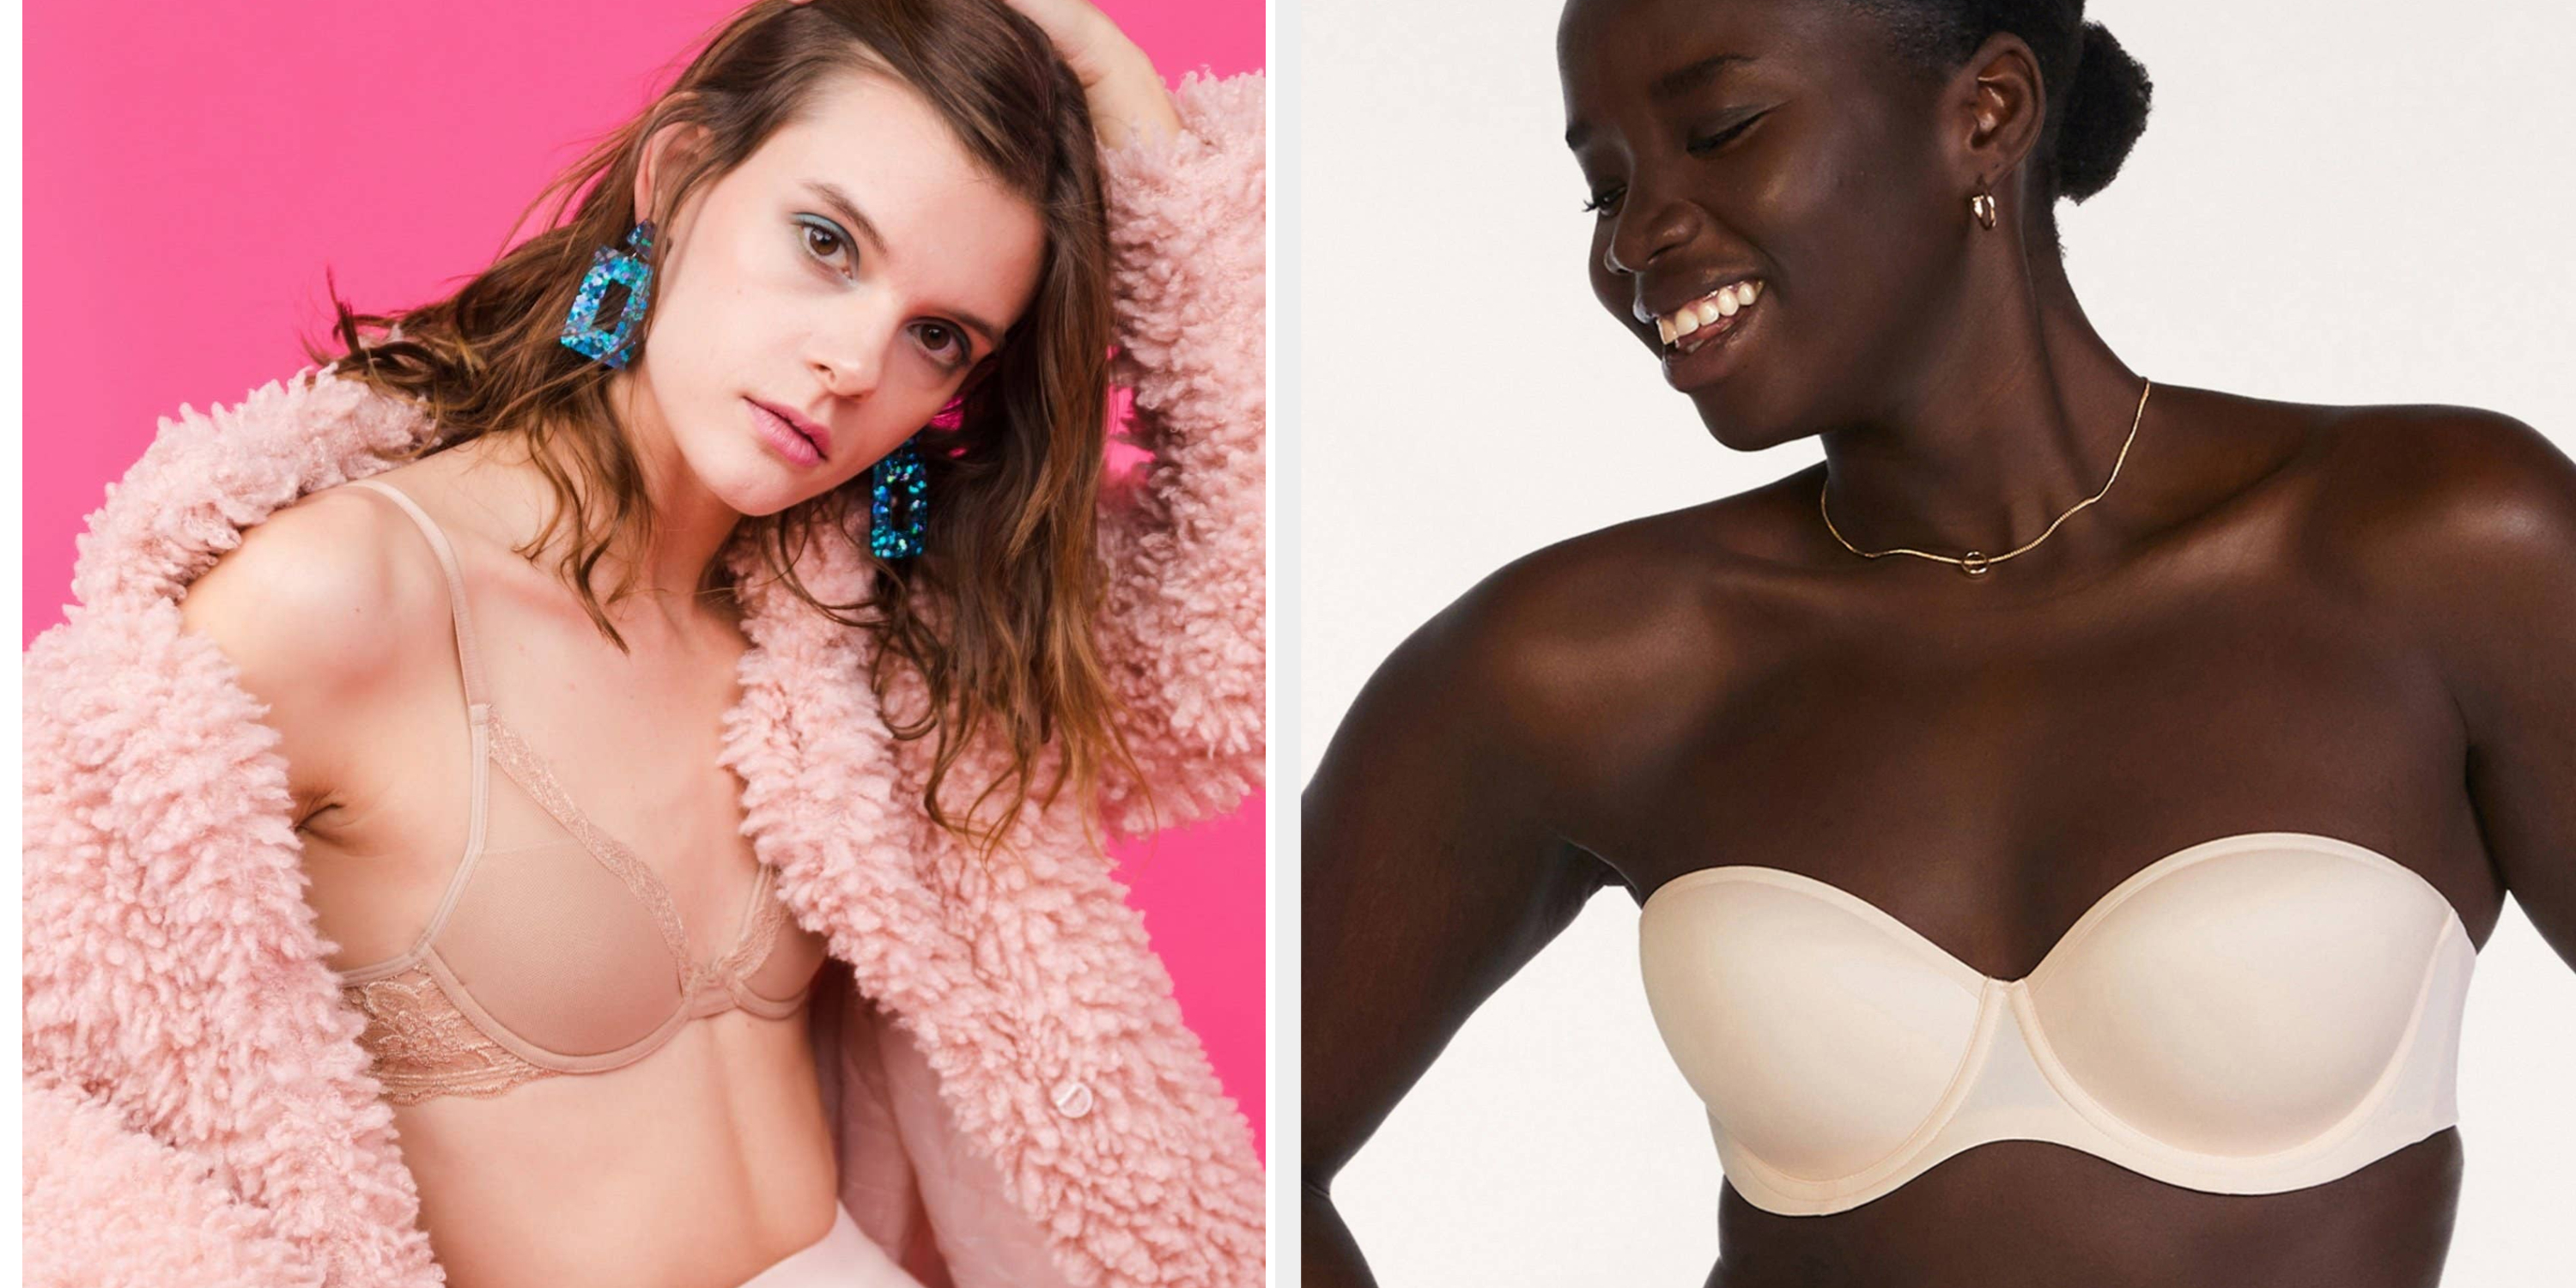 15 Places To Buy Bras If You Have Small Boobs